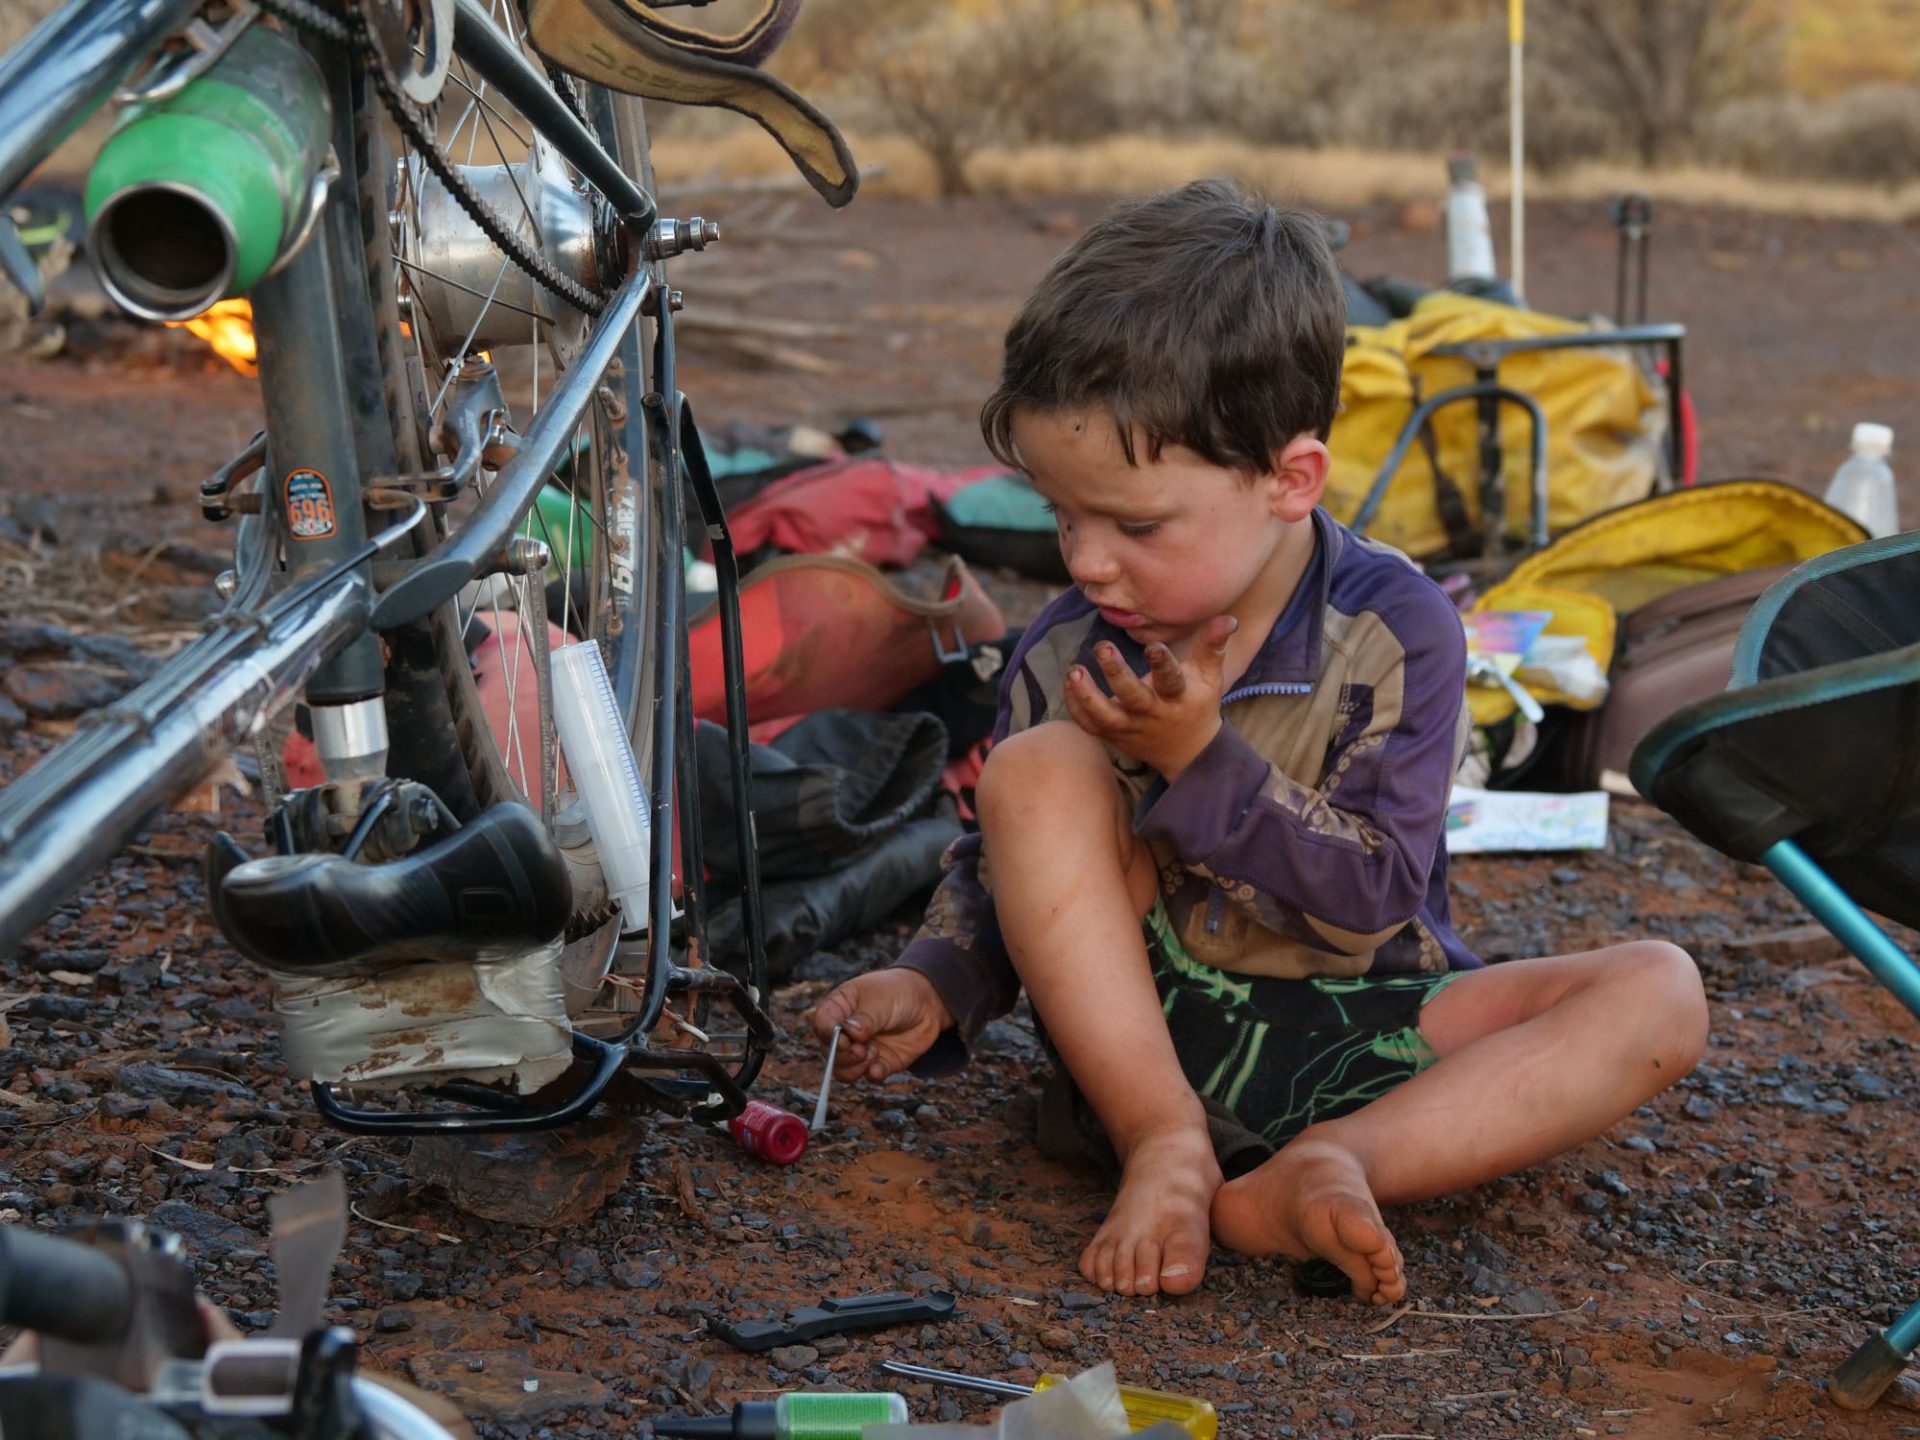 A barefoot Wilfy plays in the dirt next to an upturned bike.